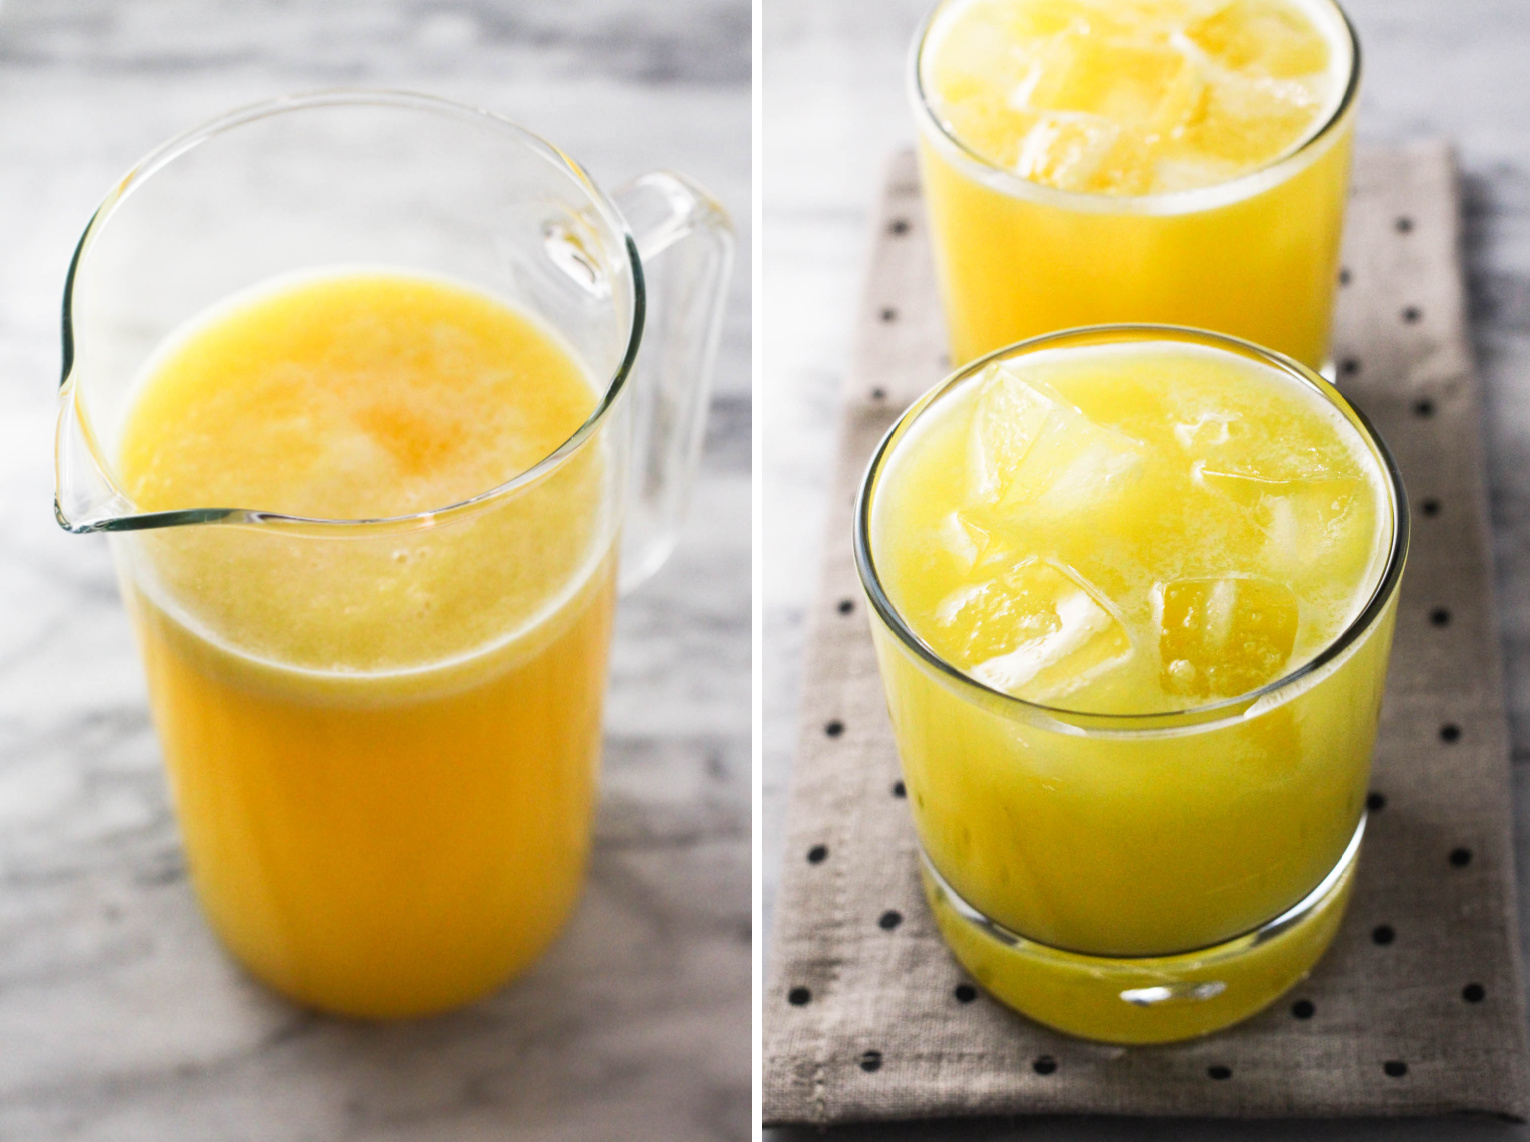 Two side-by-side images. On the left image, a glass pitcher with pineapple juice. On the right image, two glasses of pineapple juice on a linen napkin.